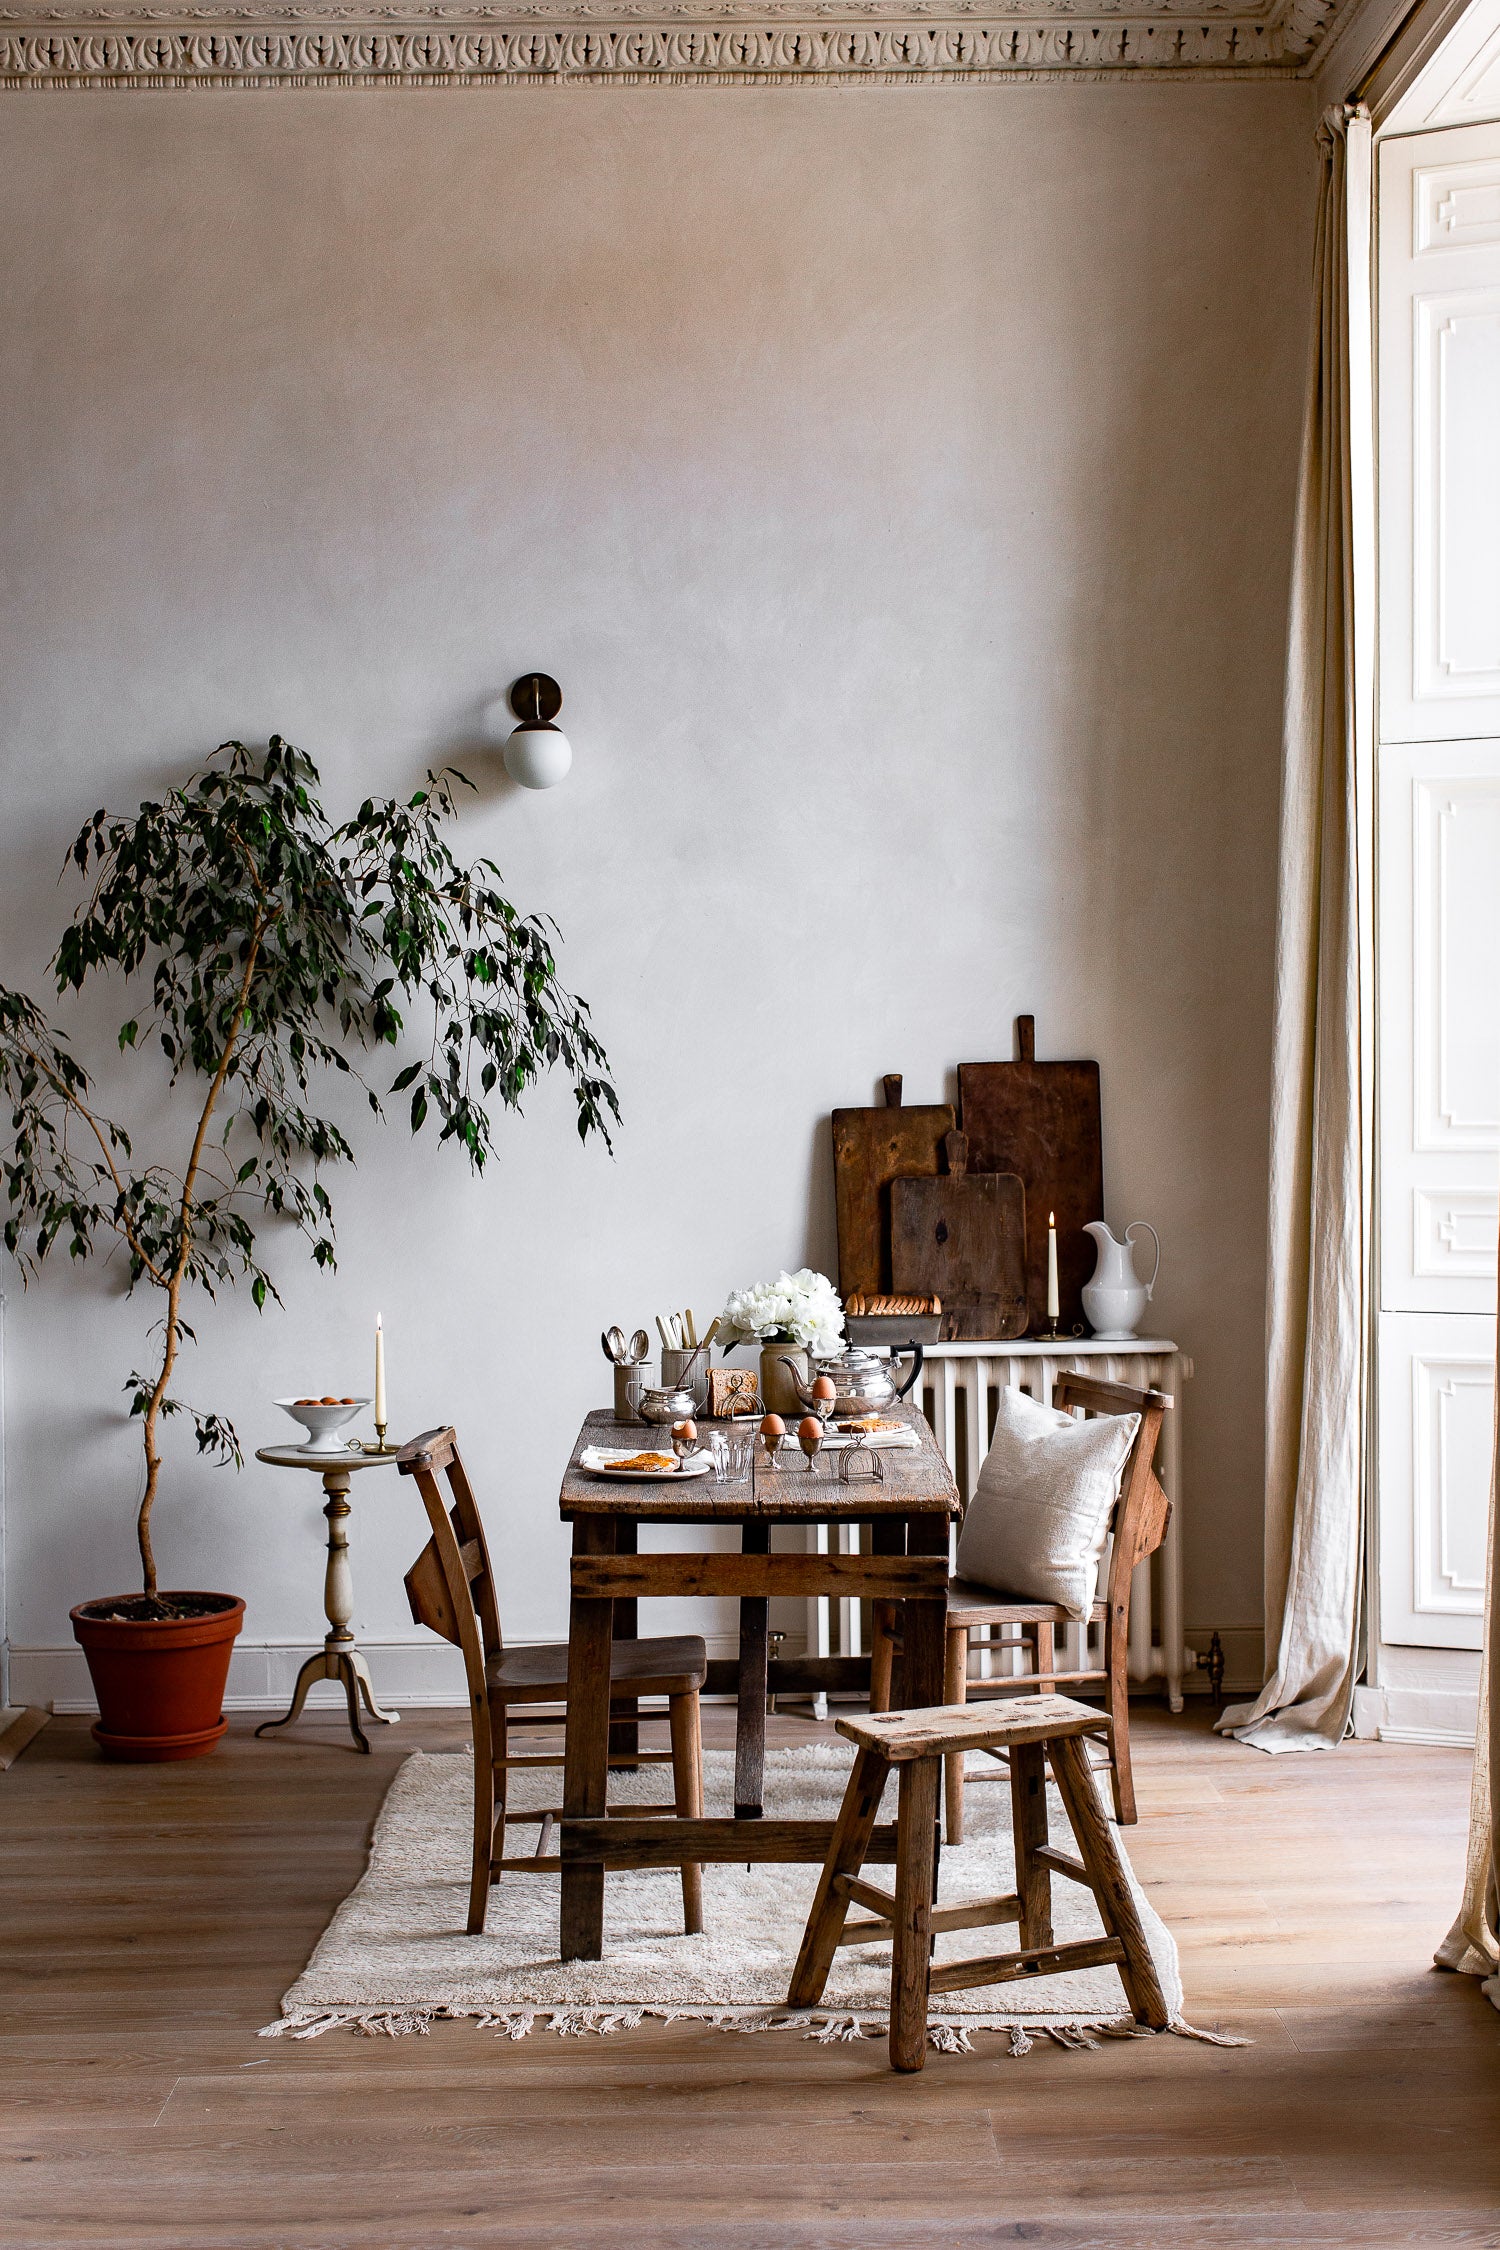 The Enduring Appeal of Vintage: Why We Love Vintage Home Décor ...